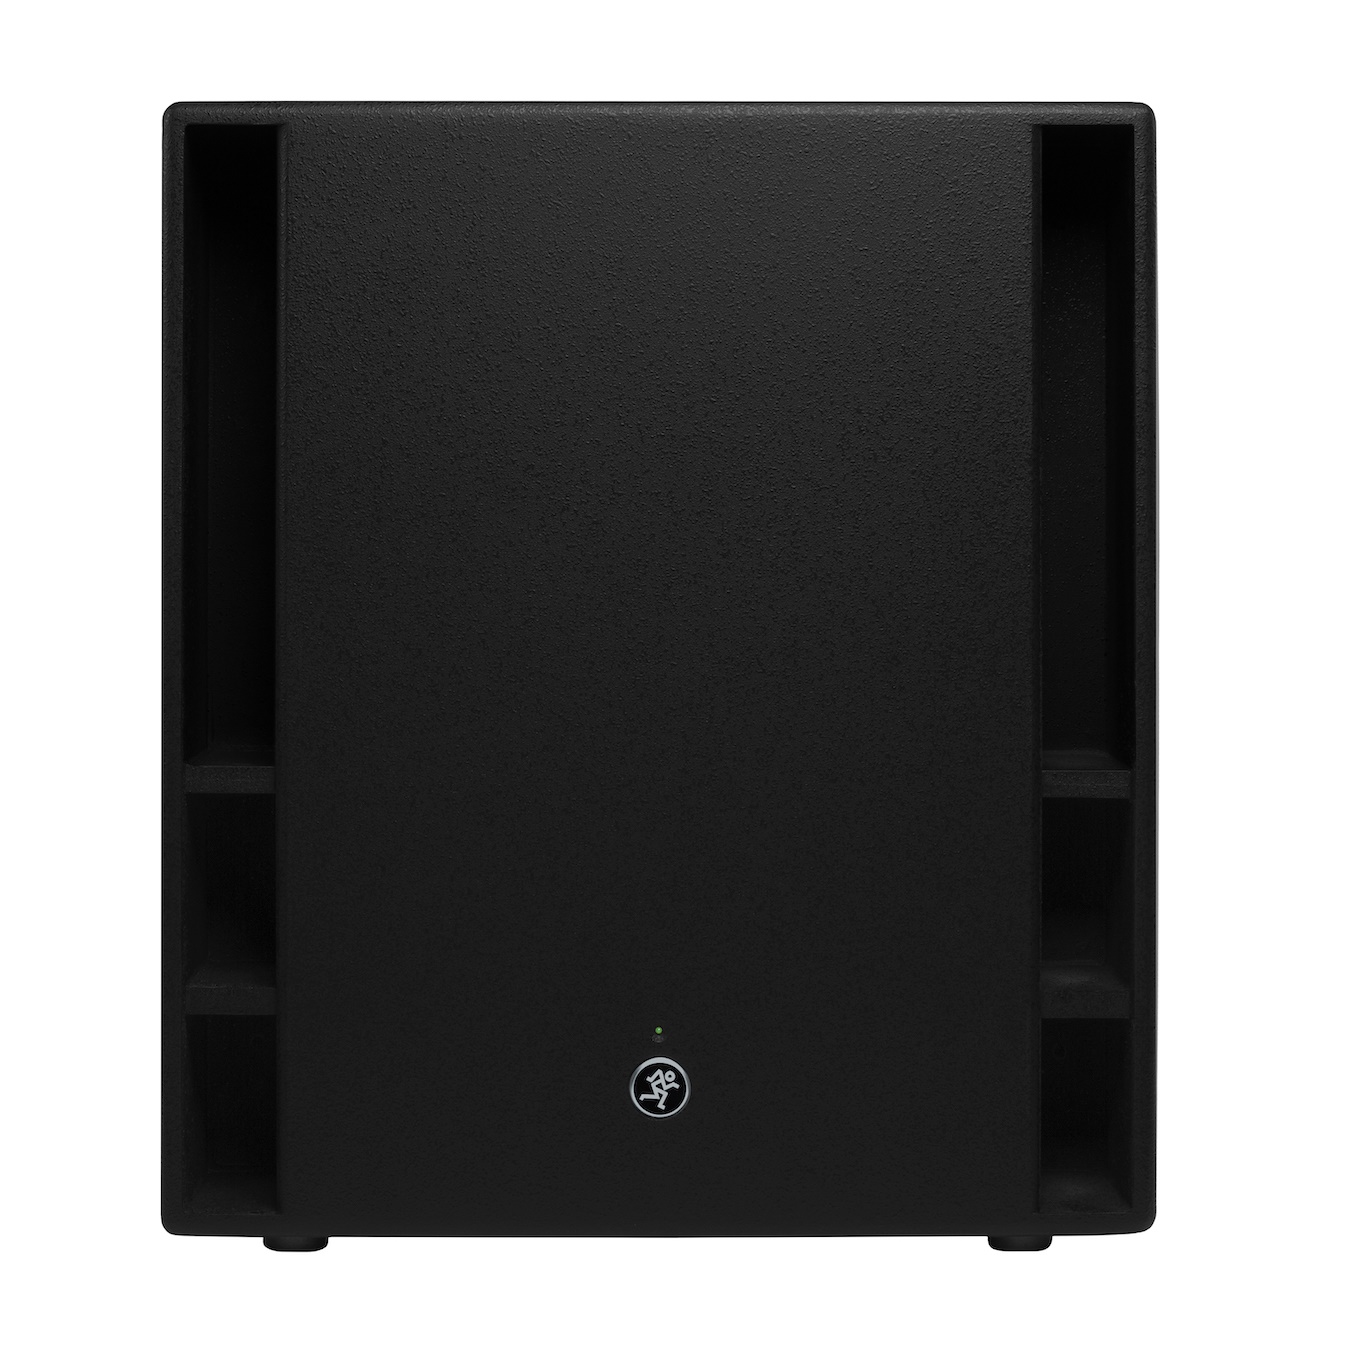 Thump18S_Front-mackie-subwoofer.jpg